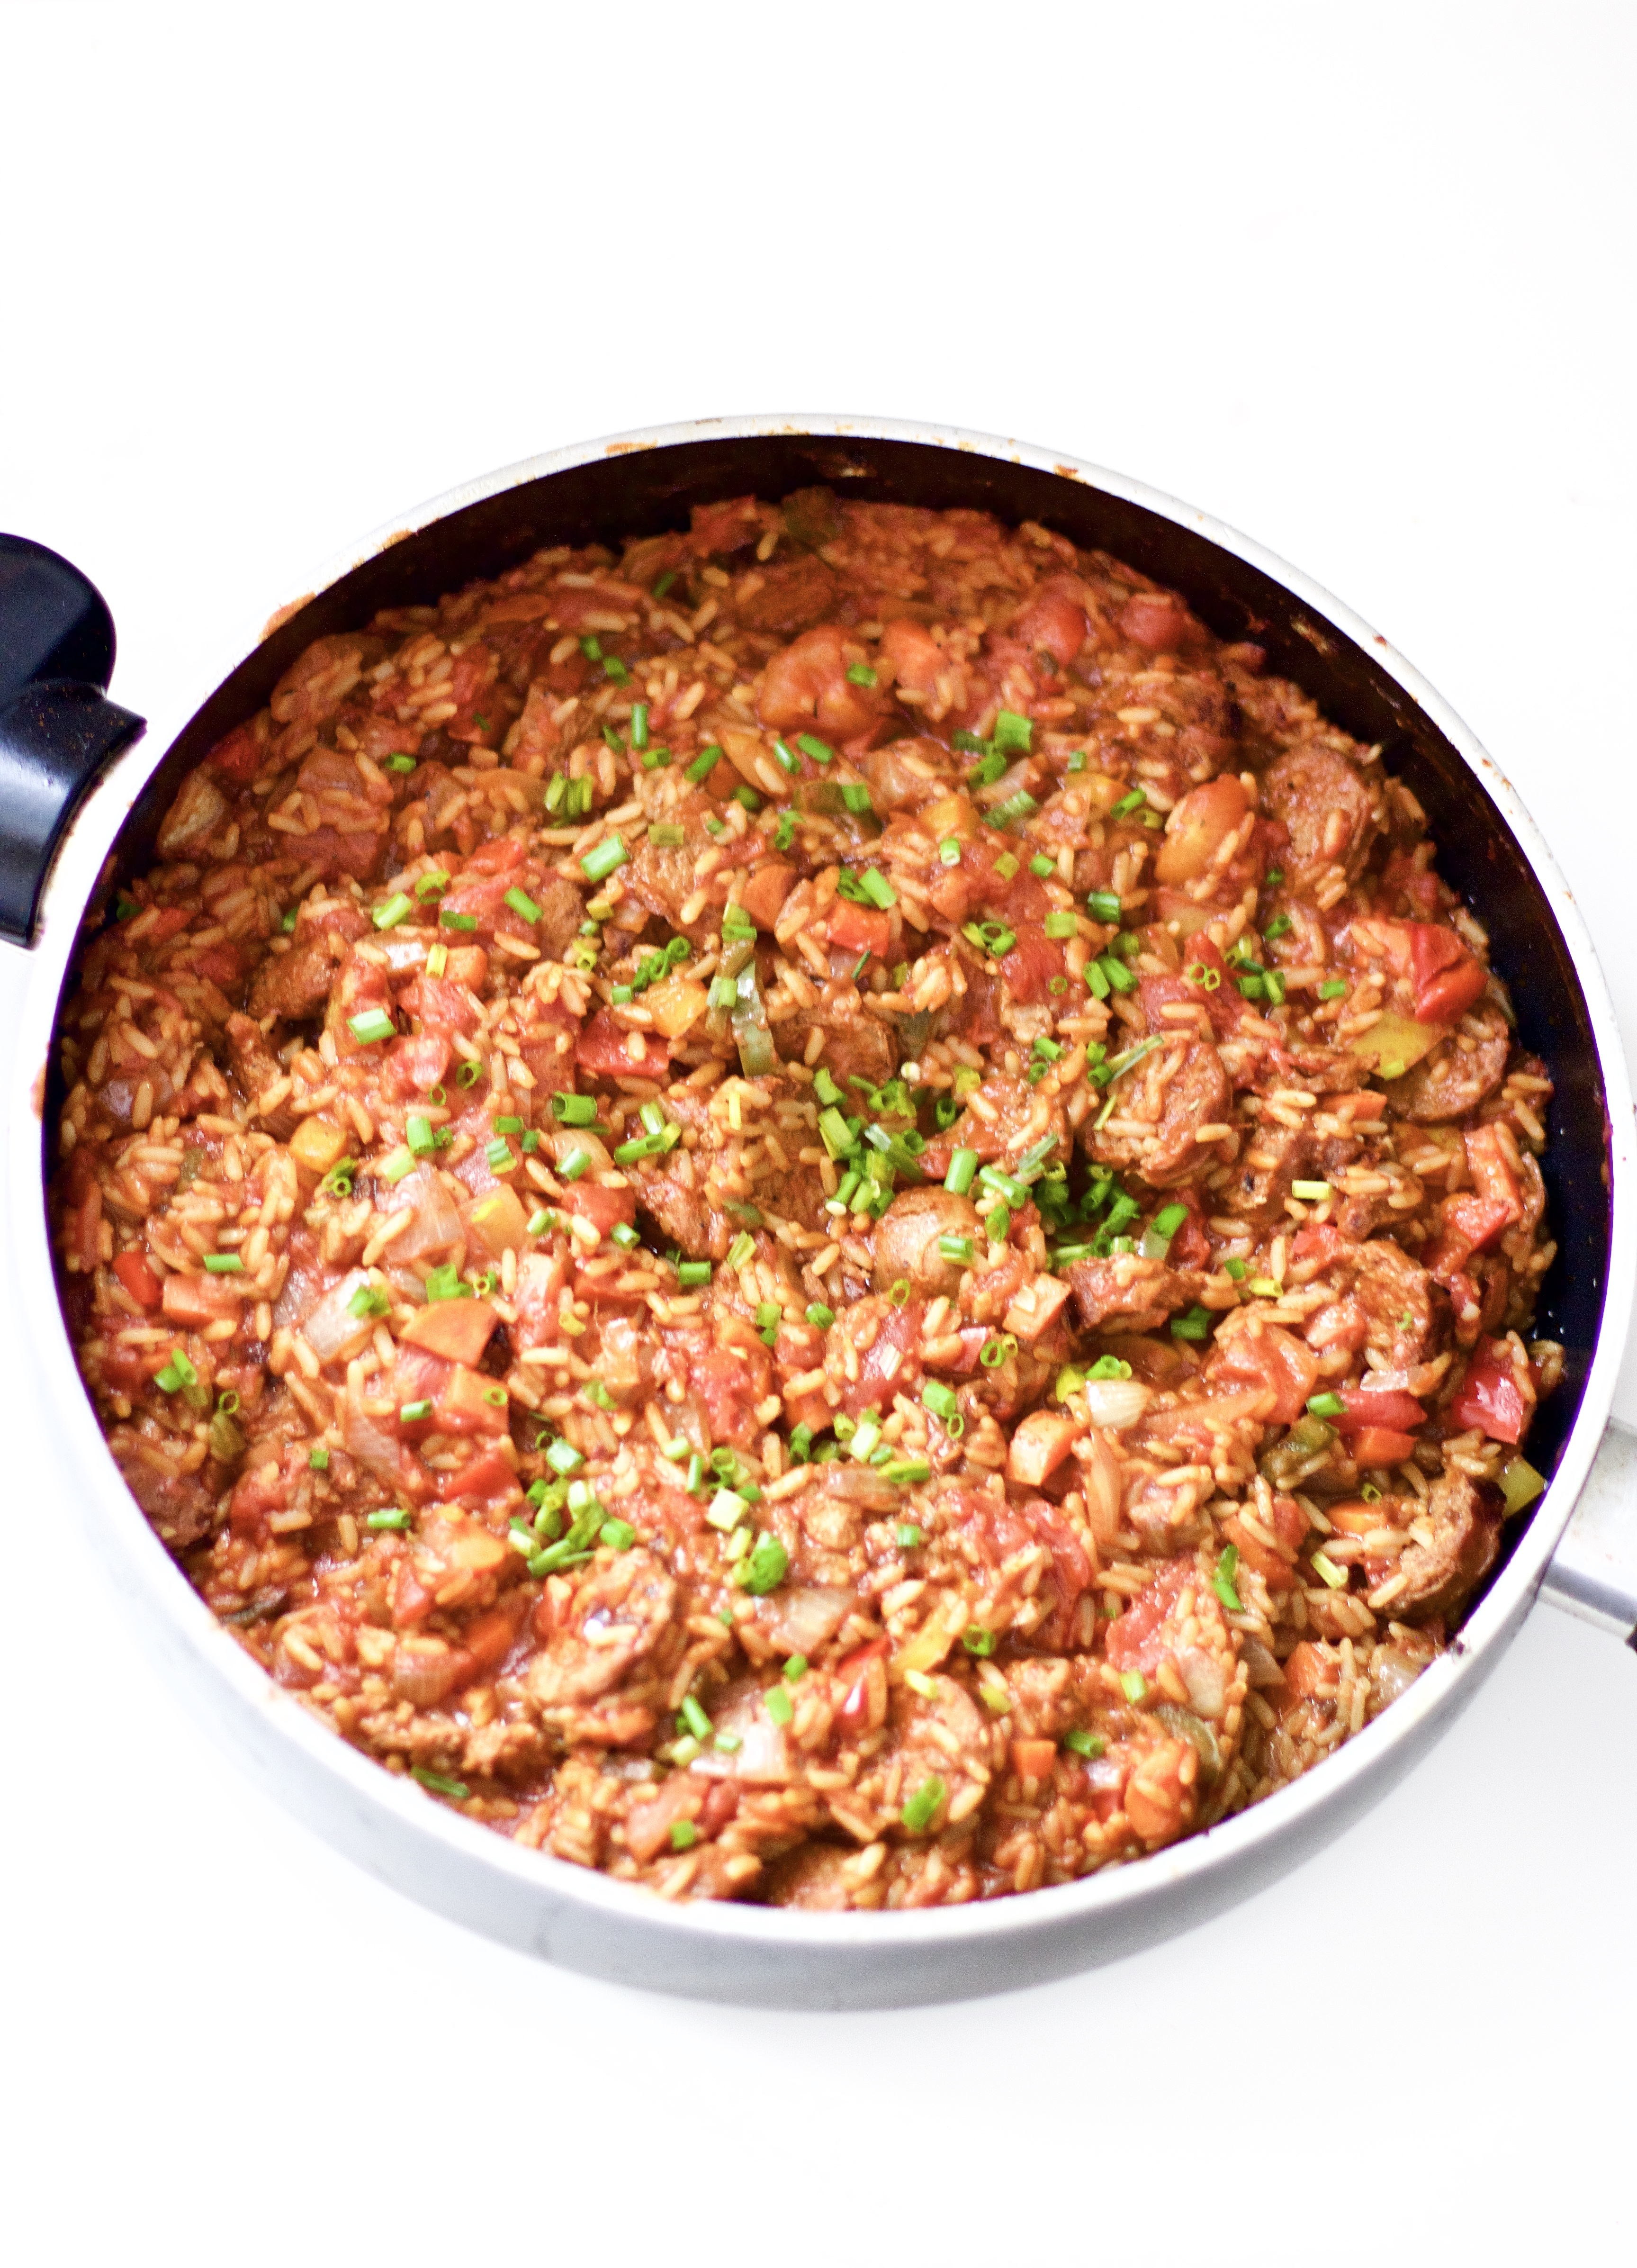 Homemade spicy sausage jambalaya is savoury and mouth watering. An easy and healthy one pot dinner recipe that's perfect for spicy food lovers, easy to cook up and a hearty, wholesome, and gluten-free meal. Family Friendly | Gluten-Free Rice | Main Dish | Dinner Recipe | Southern Dish | Southern Recipes | Cajun | Seasoning | From Scratch | Spicy Sausage | One Pot Meal |